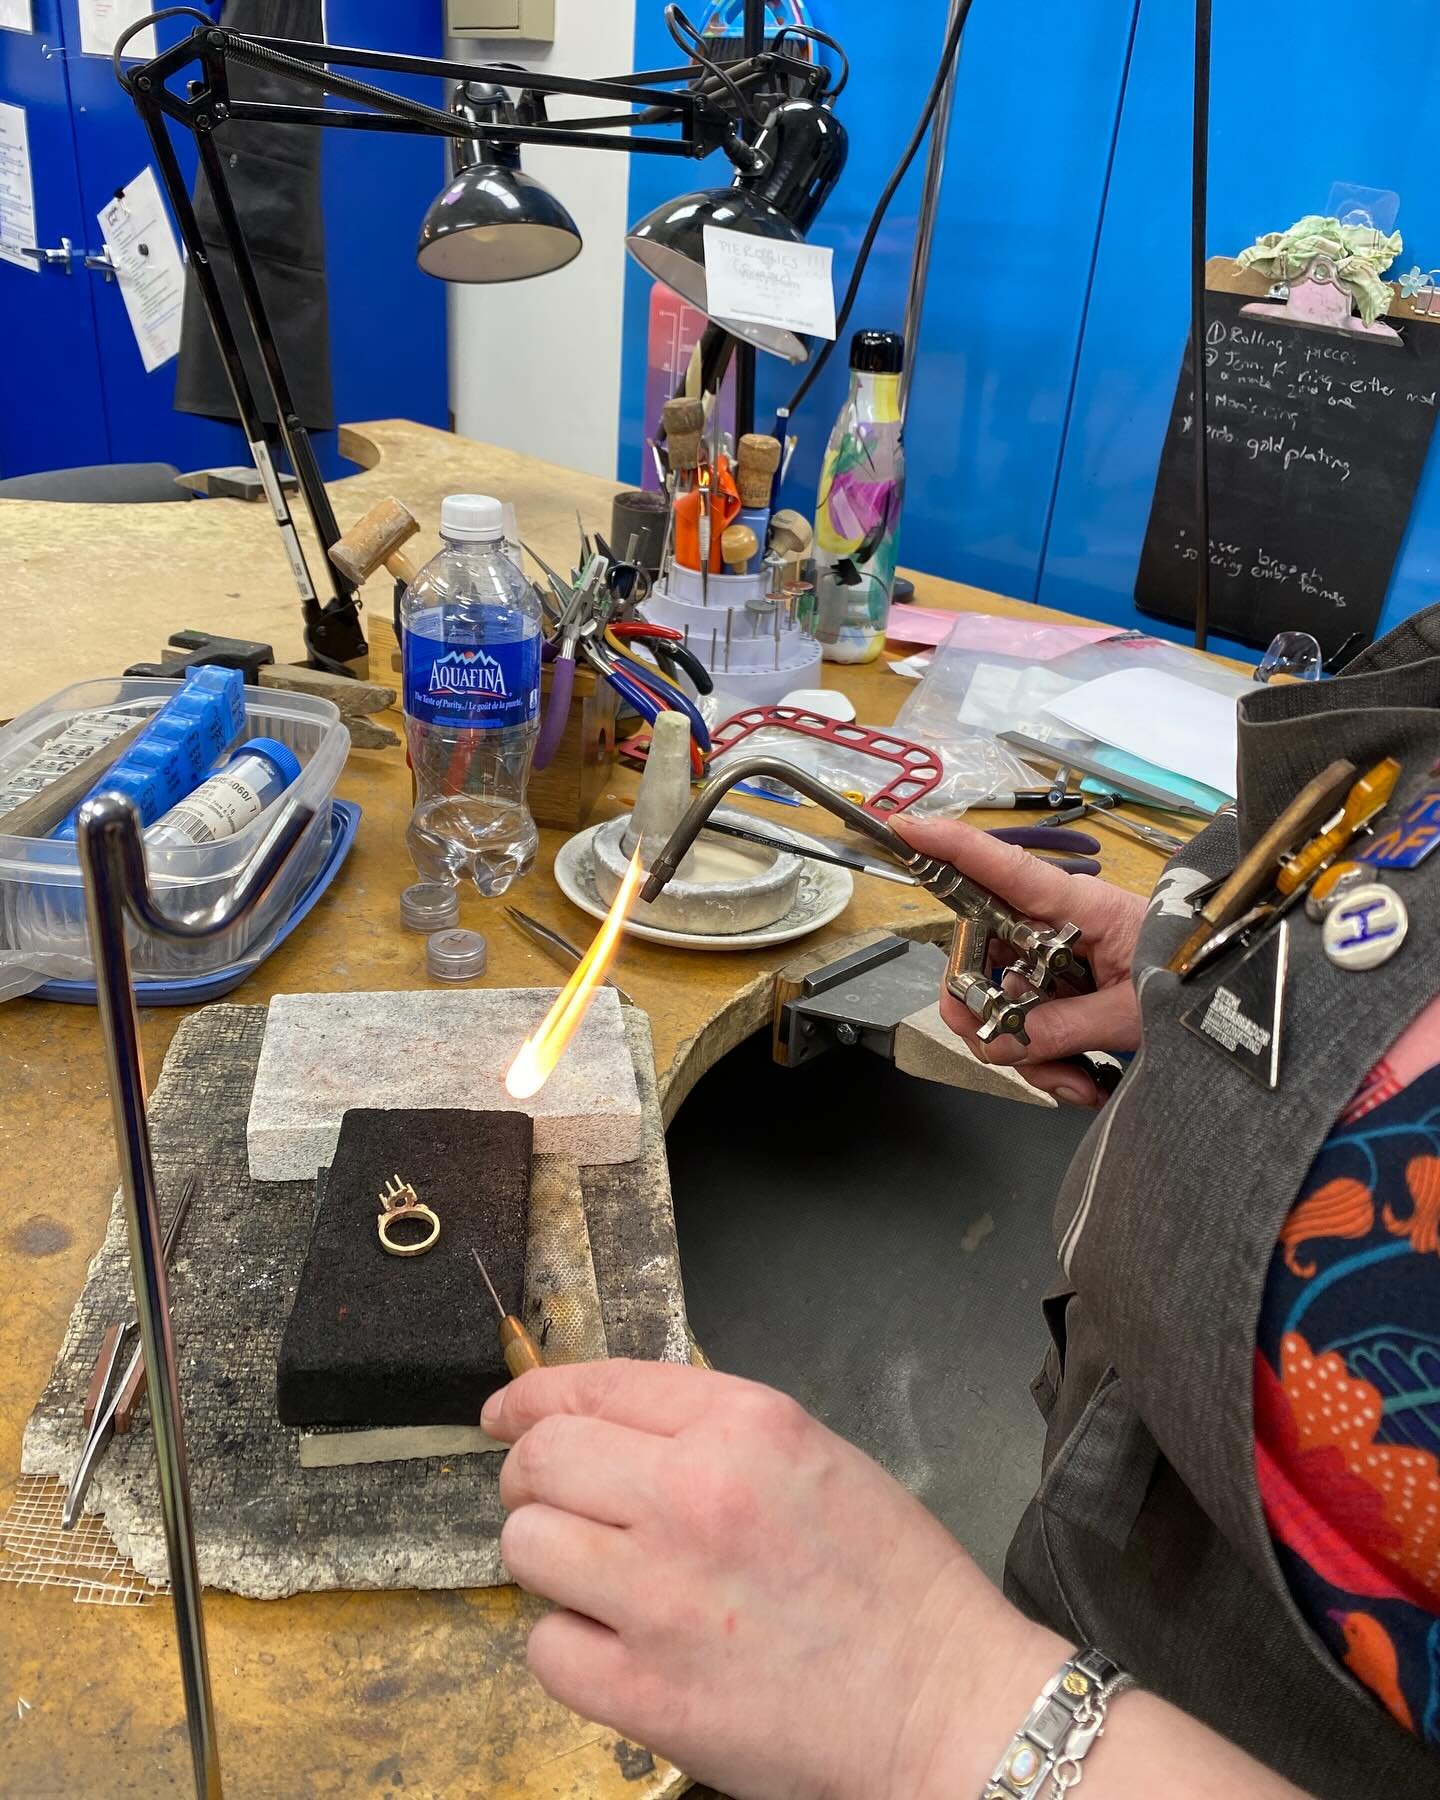 Bench action shot! I hate a love/hate relationship with soldering! But the ring I&rsquo;m working on is almost done! I&rsquo;m so excited to share it with you!  What do you love to hate?
#handmadeintoronto #fire #onmybench #sciart #sciartist #science